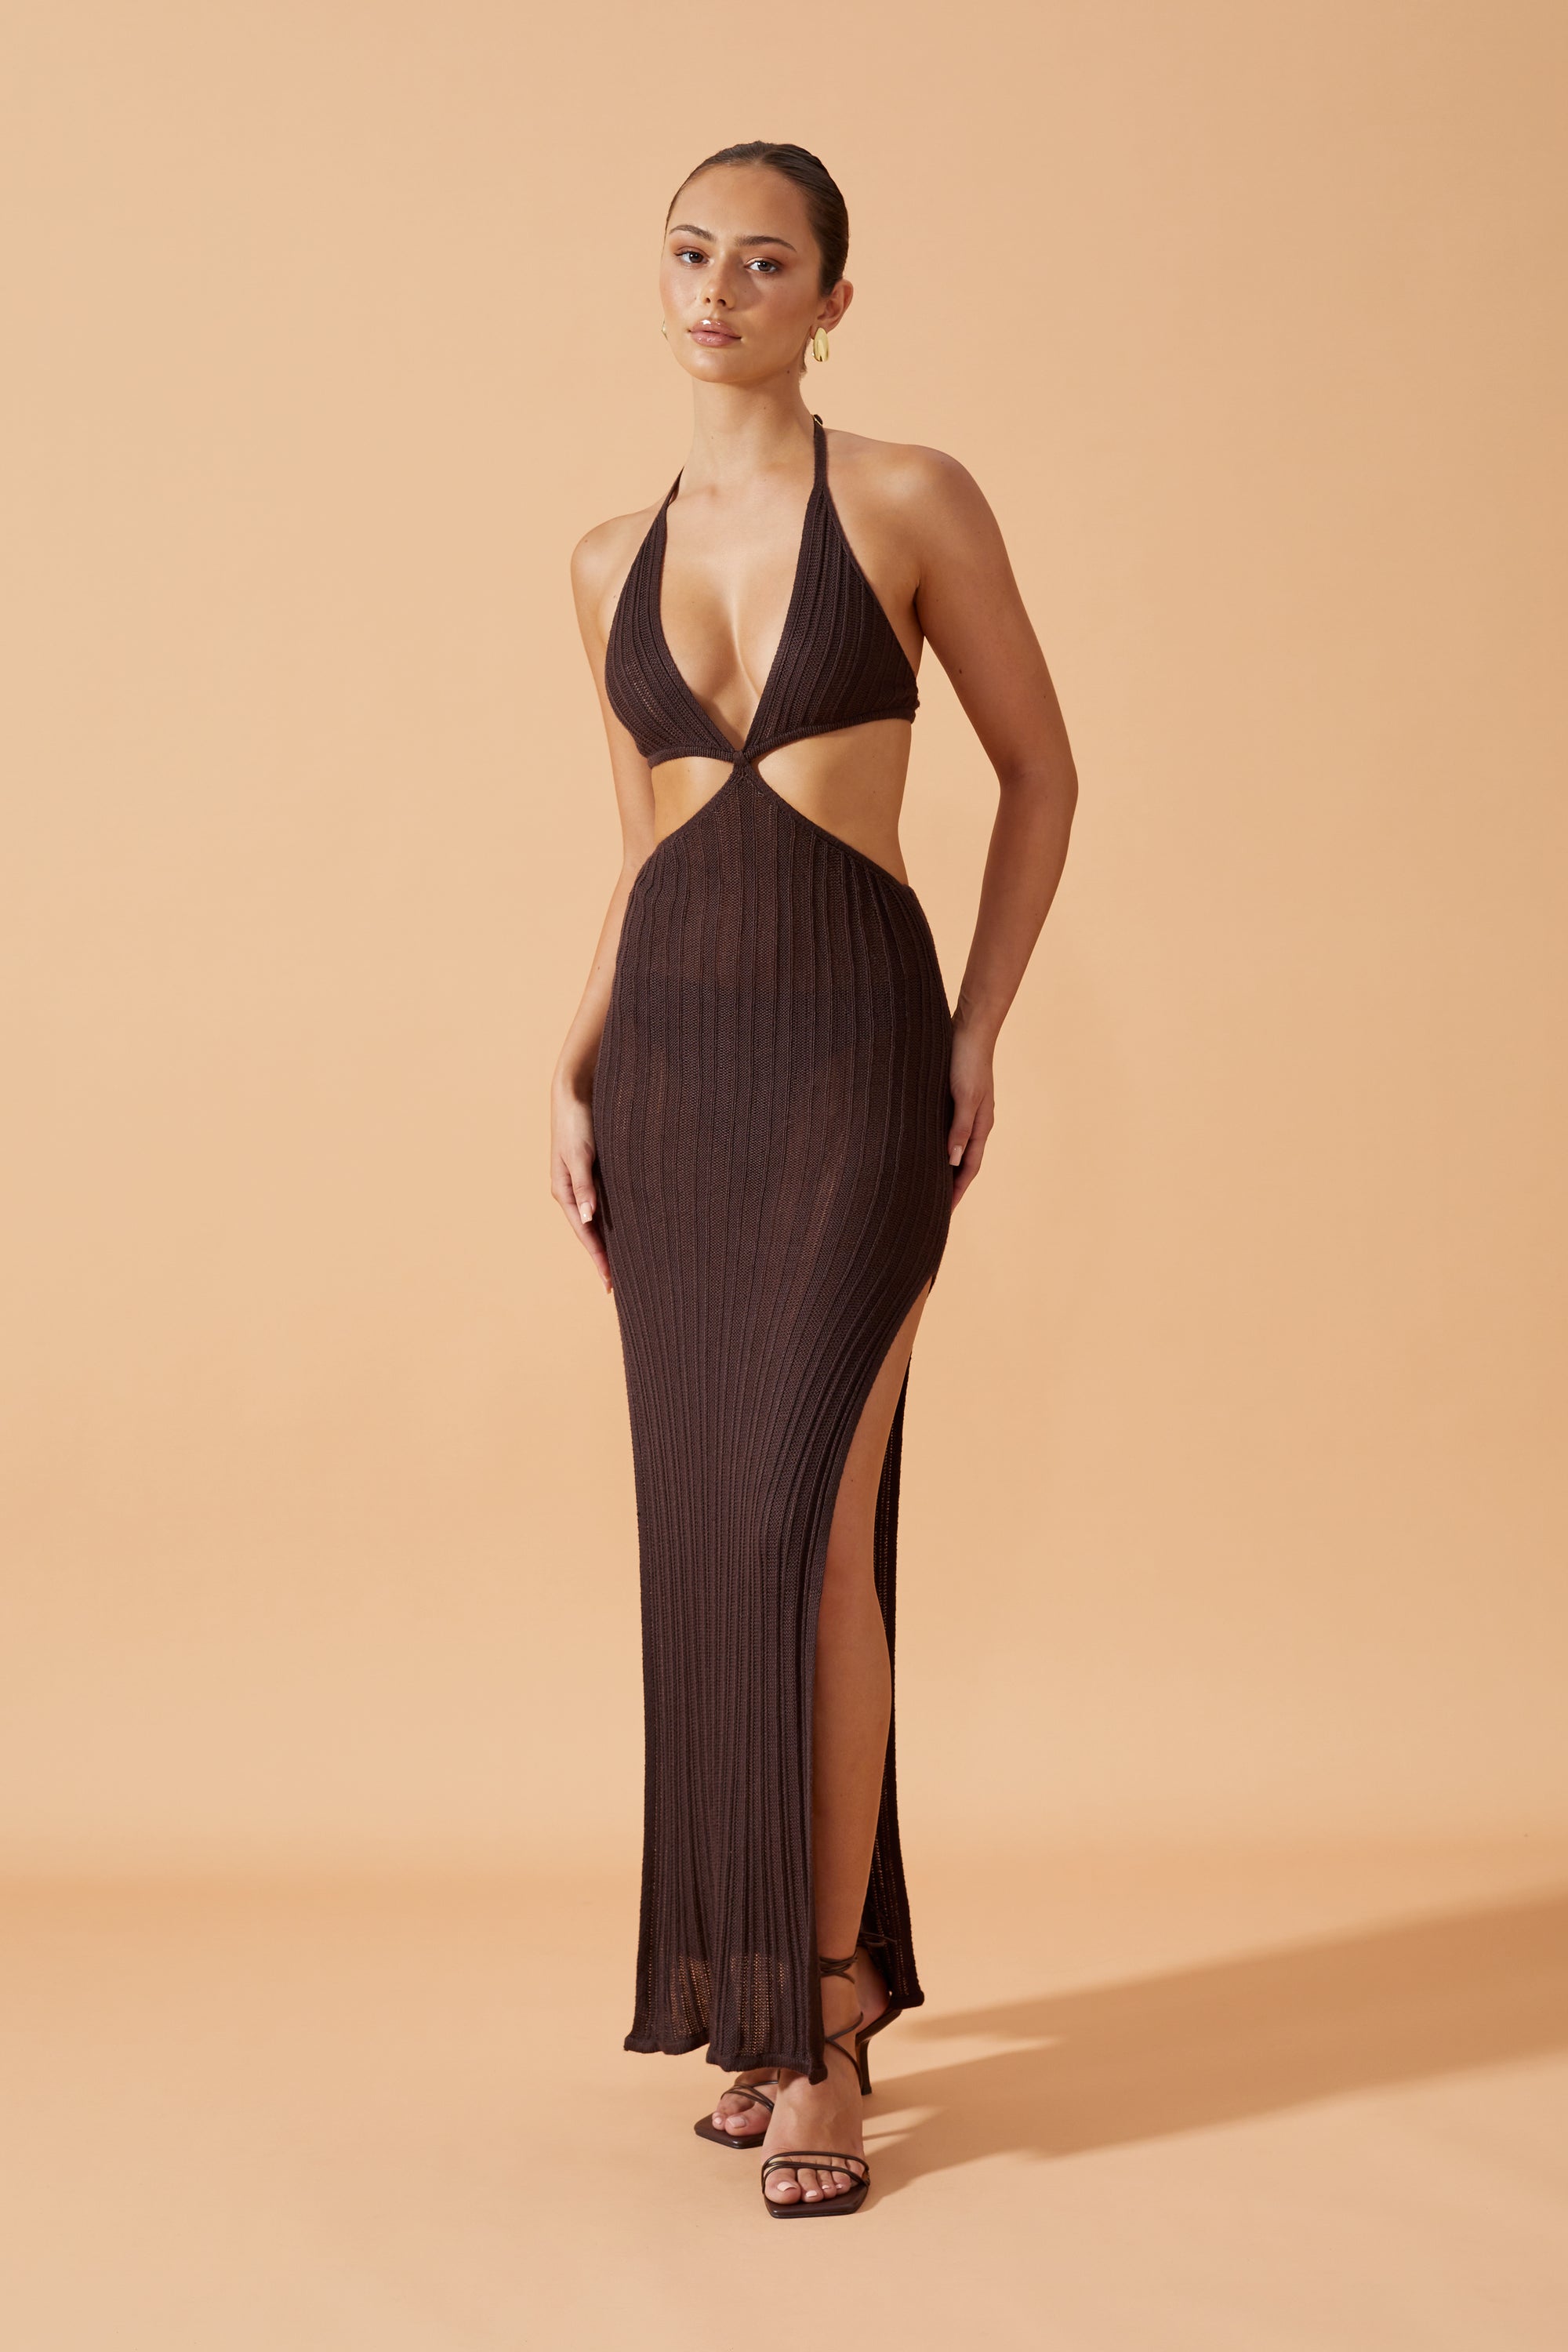 Flook The Label Giina Kitted Dress in Chocolate. Cut outs on the side and side slit. Front View